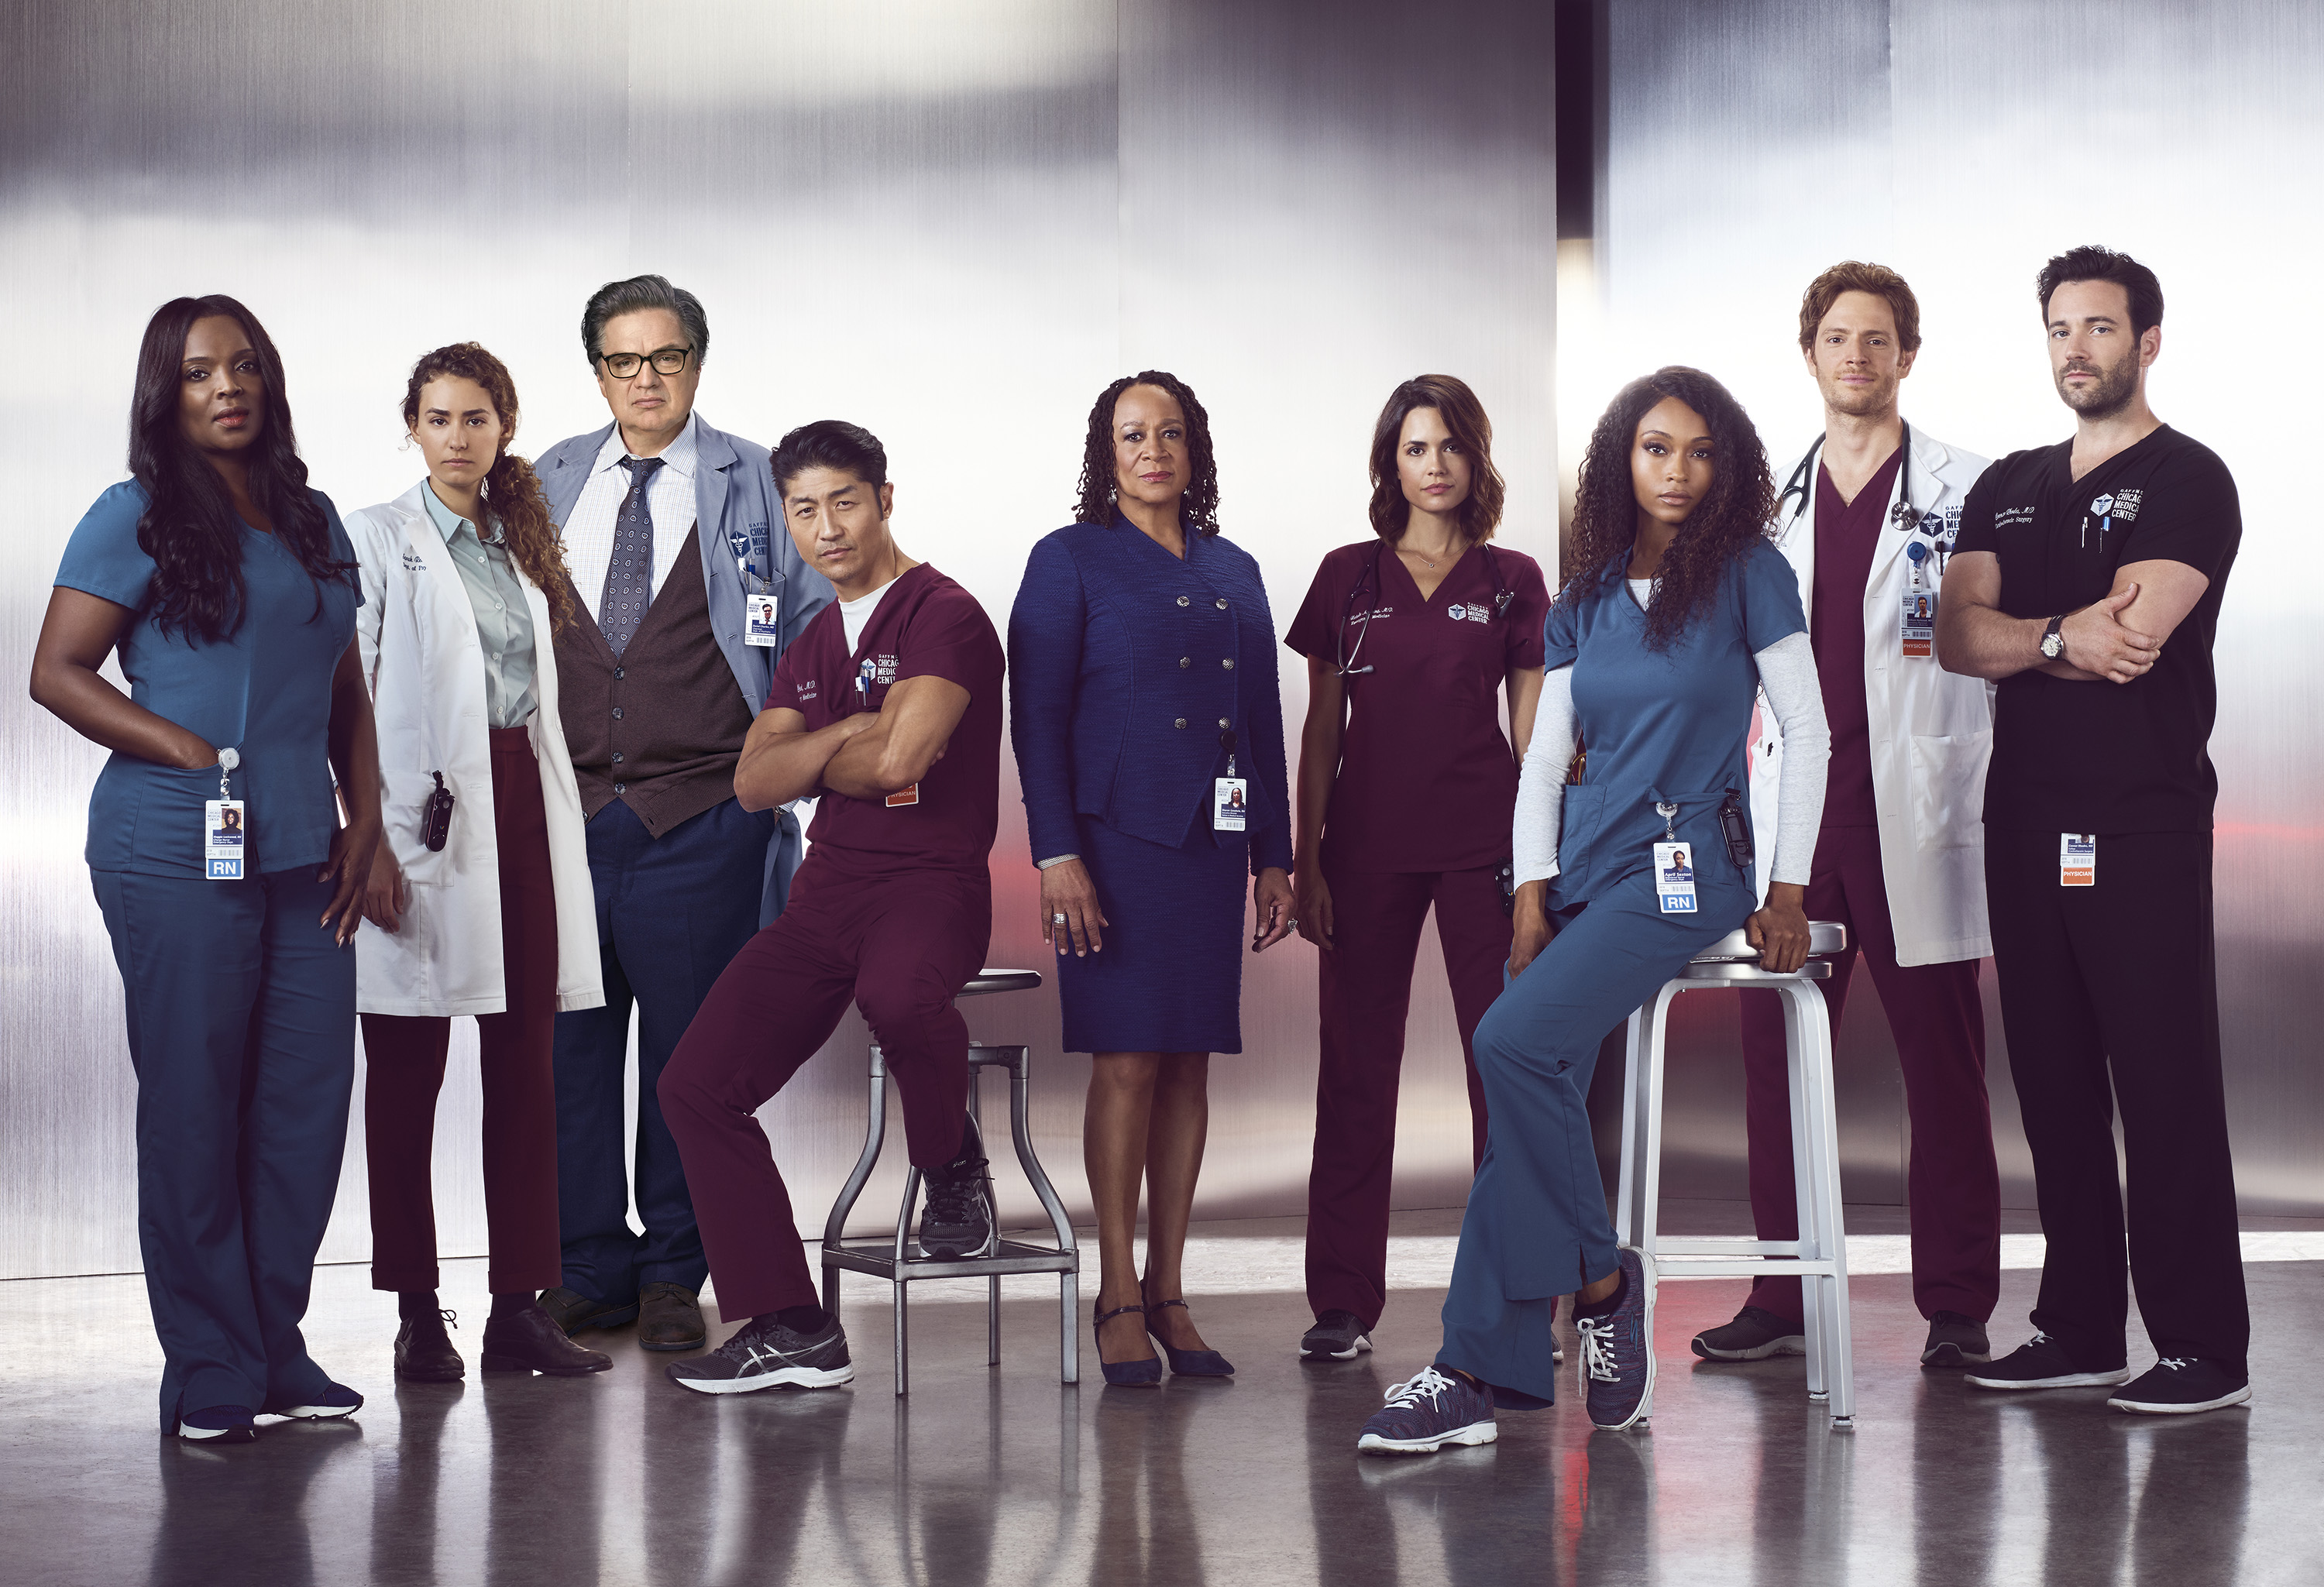 Maggie Lockwood, Sarah Reese, Daniel Charles, Ethan Choi, Sharon Goodwin, Natalie Manning, April Sexton, Will Halstead, Connor Rhodes. These Chicago Med characters are in the pilot episode.